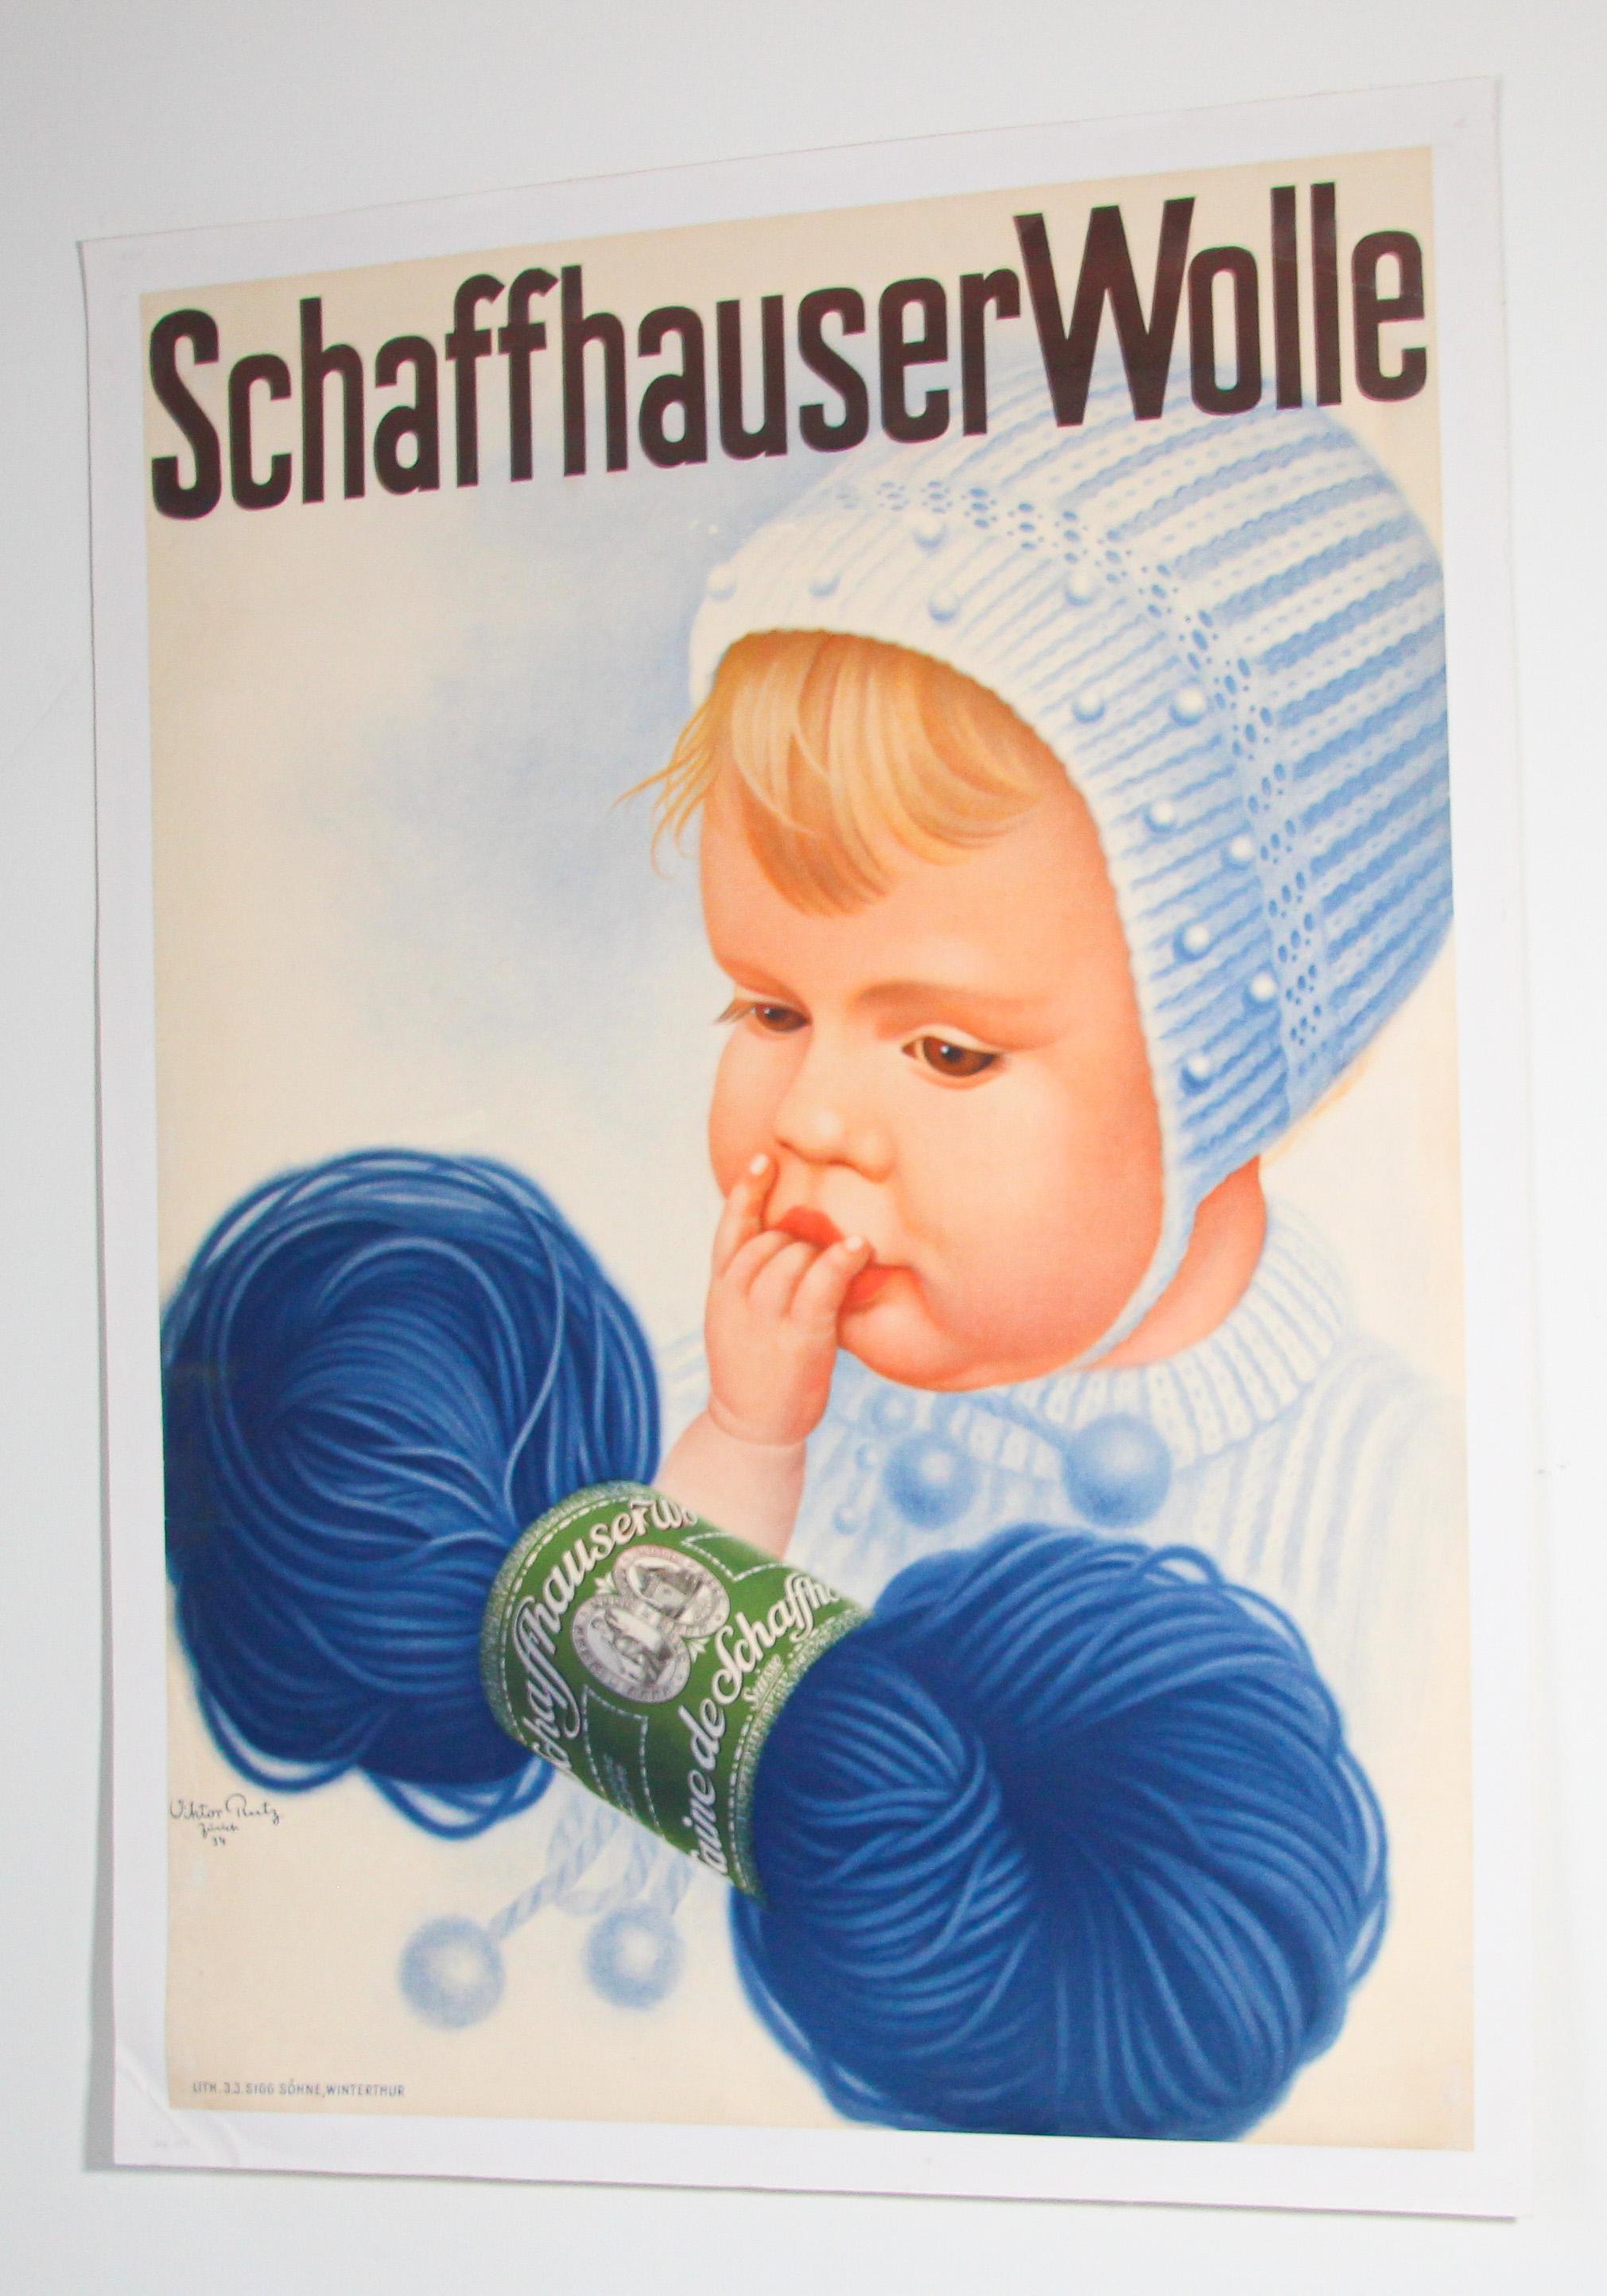 Swiss Schaffhauser Wolle Wool Yarn Knitting 1934 Baby Blue Vintage Poster  For Sale 6